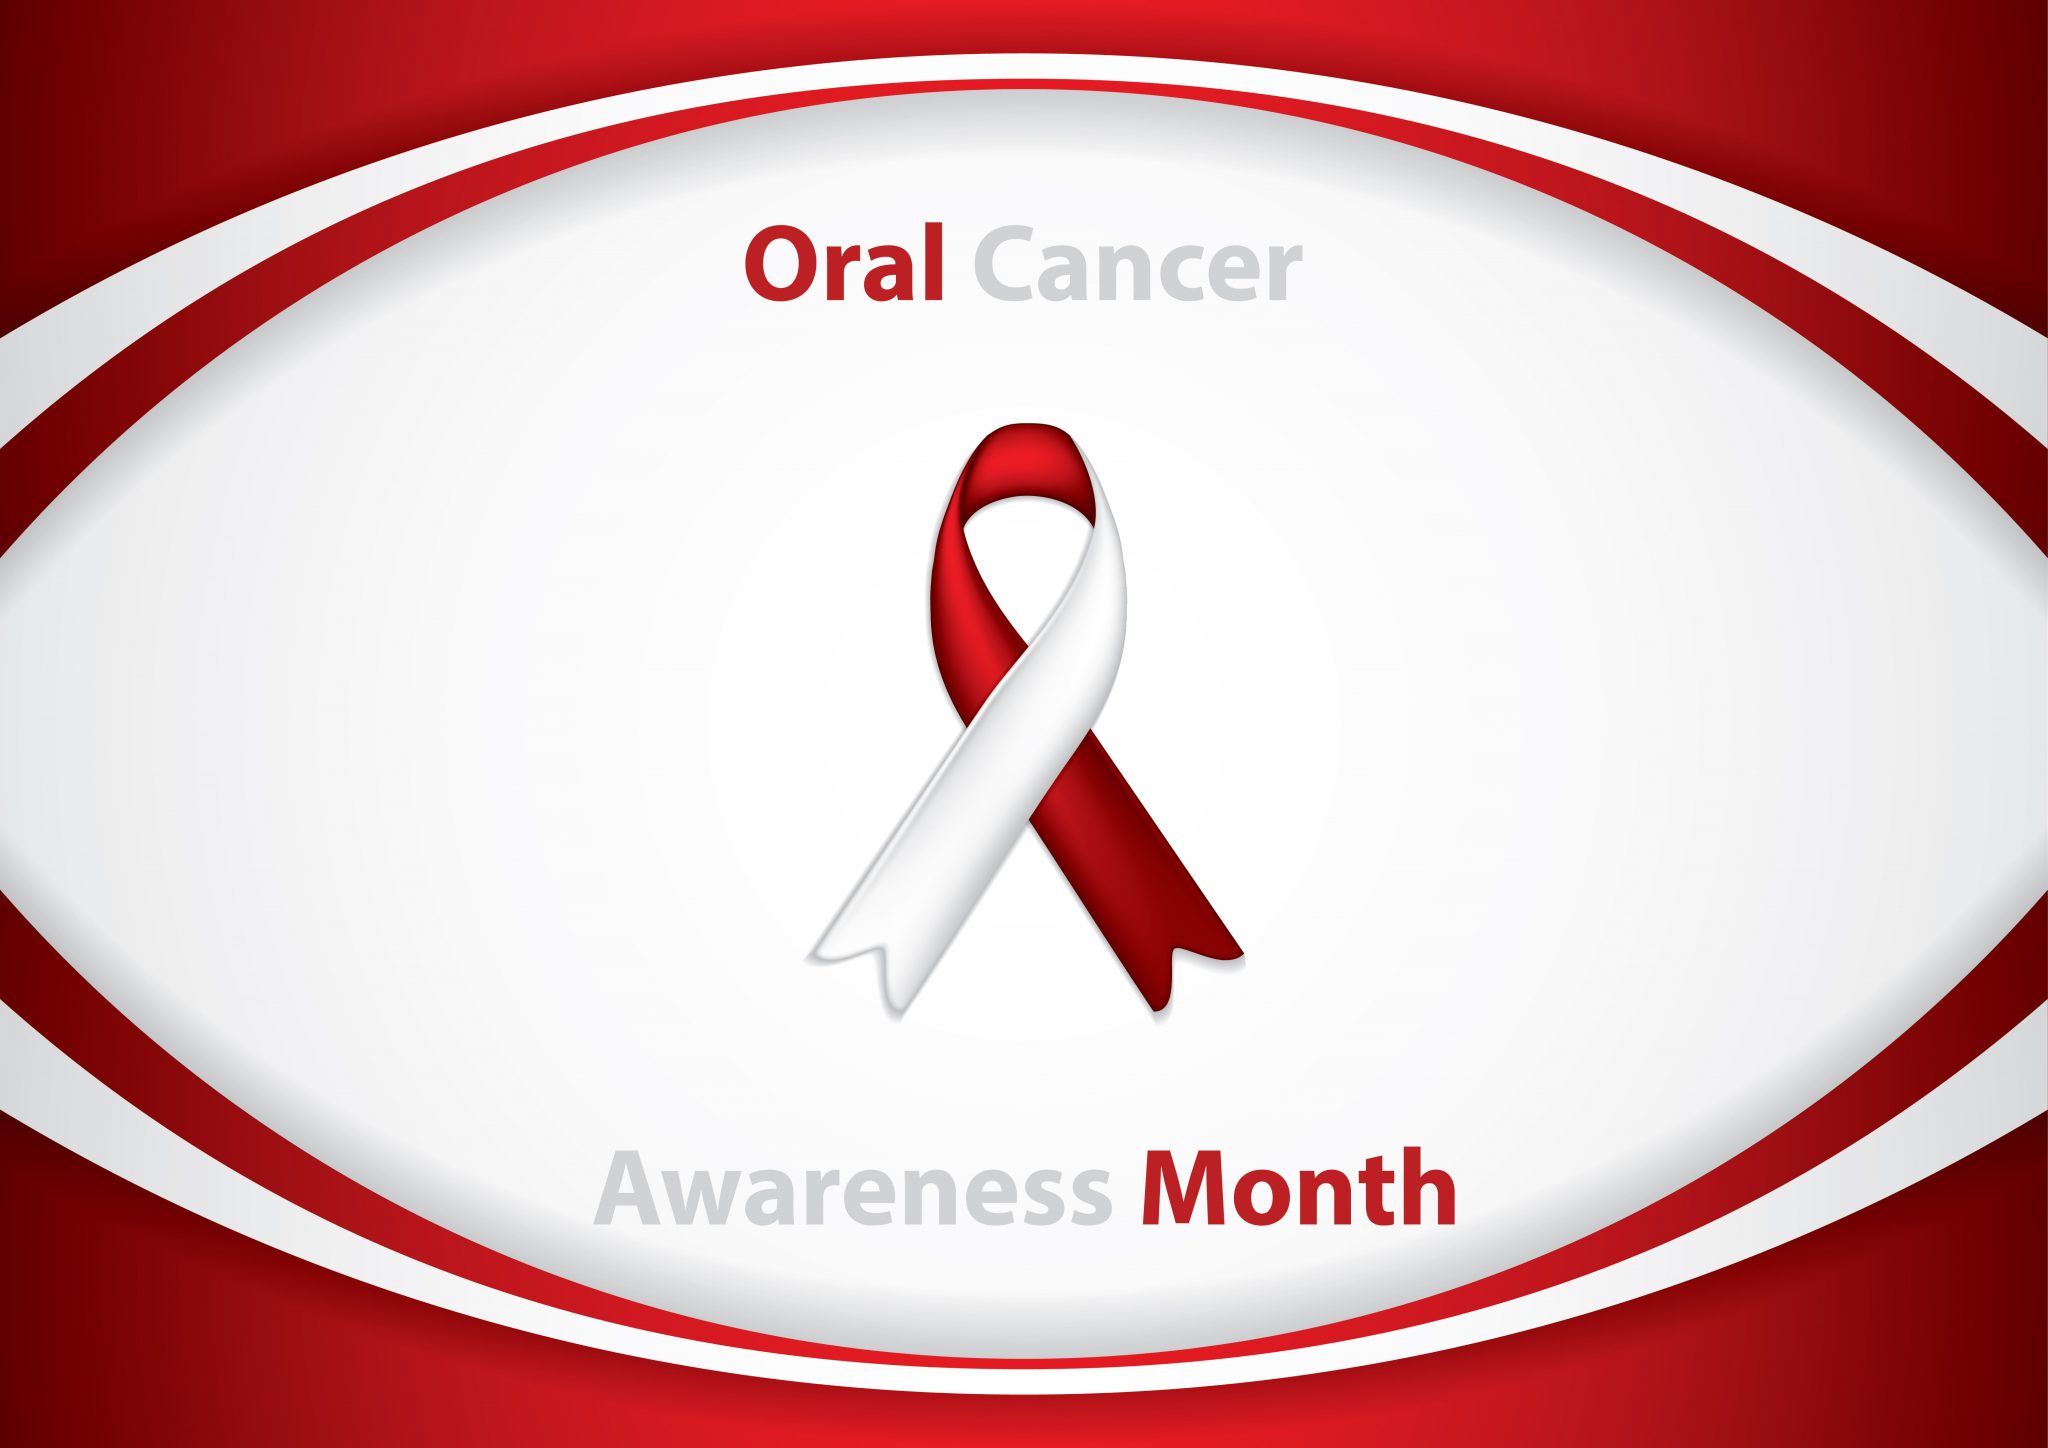 Did You Know That April is Oral Cancer Awareness Month?